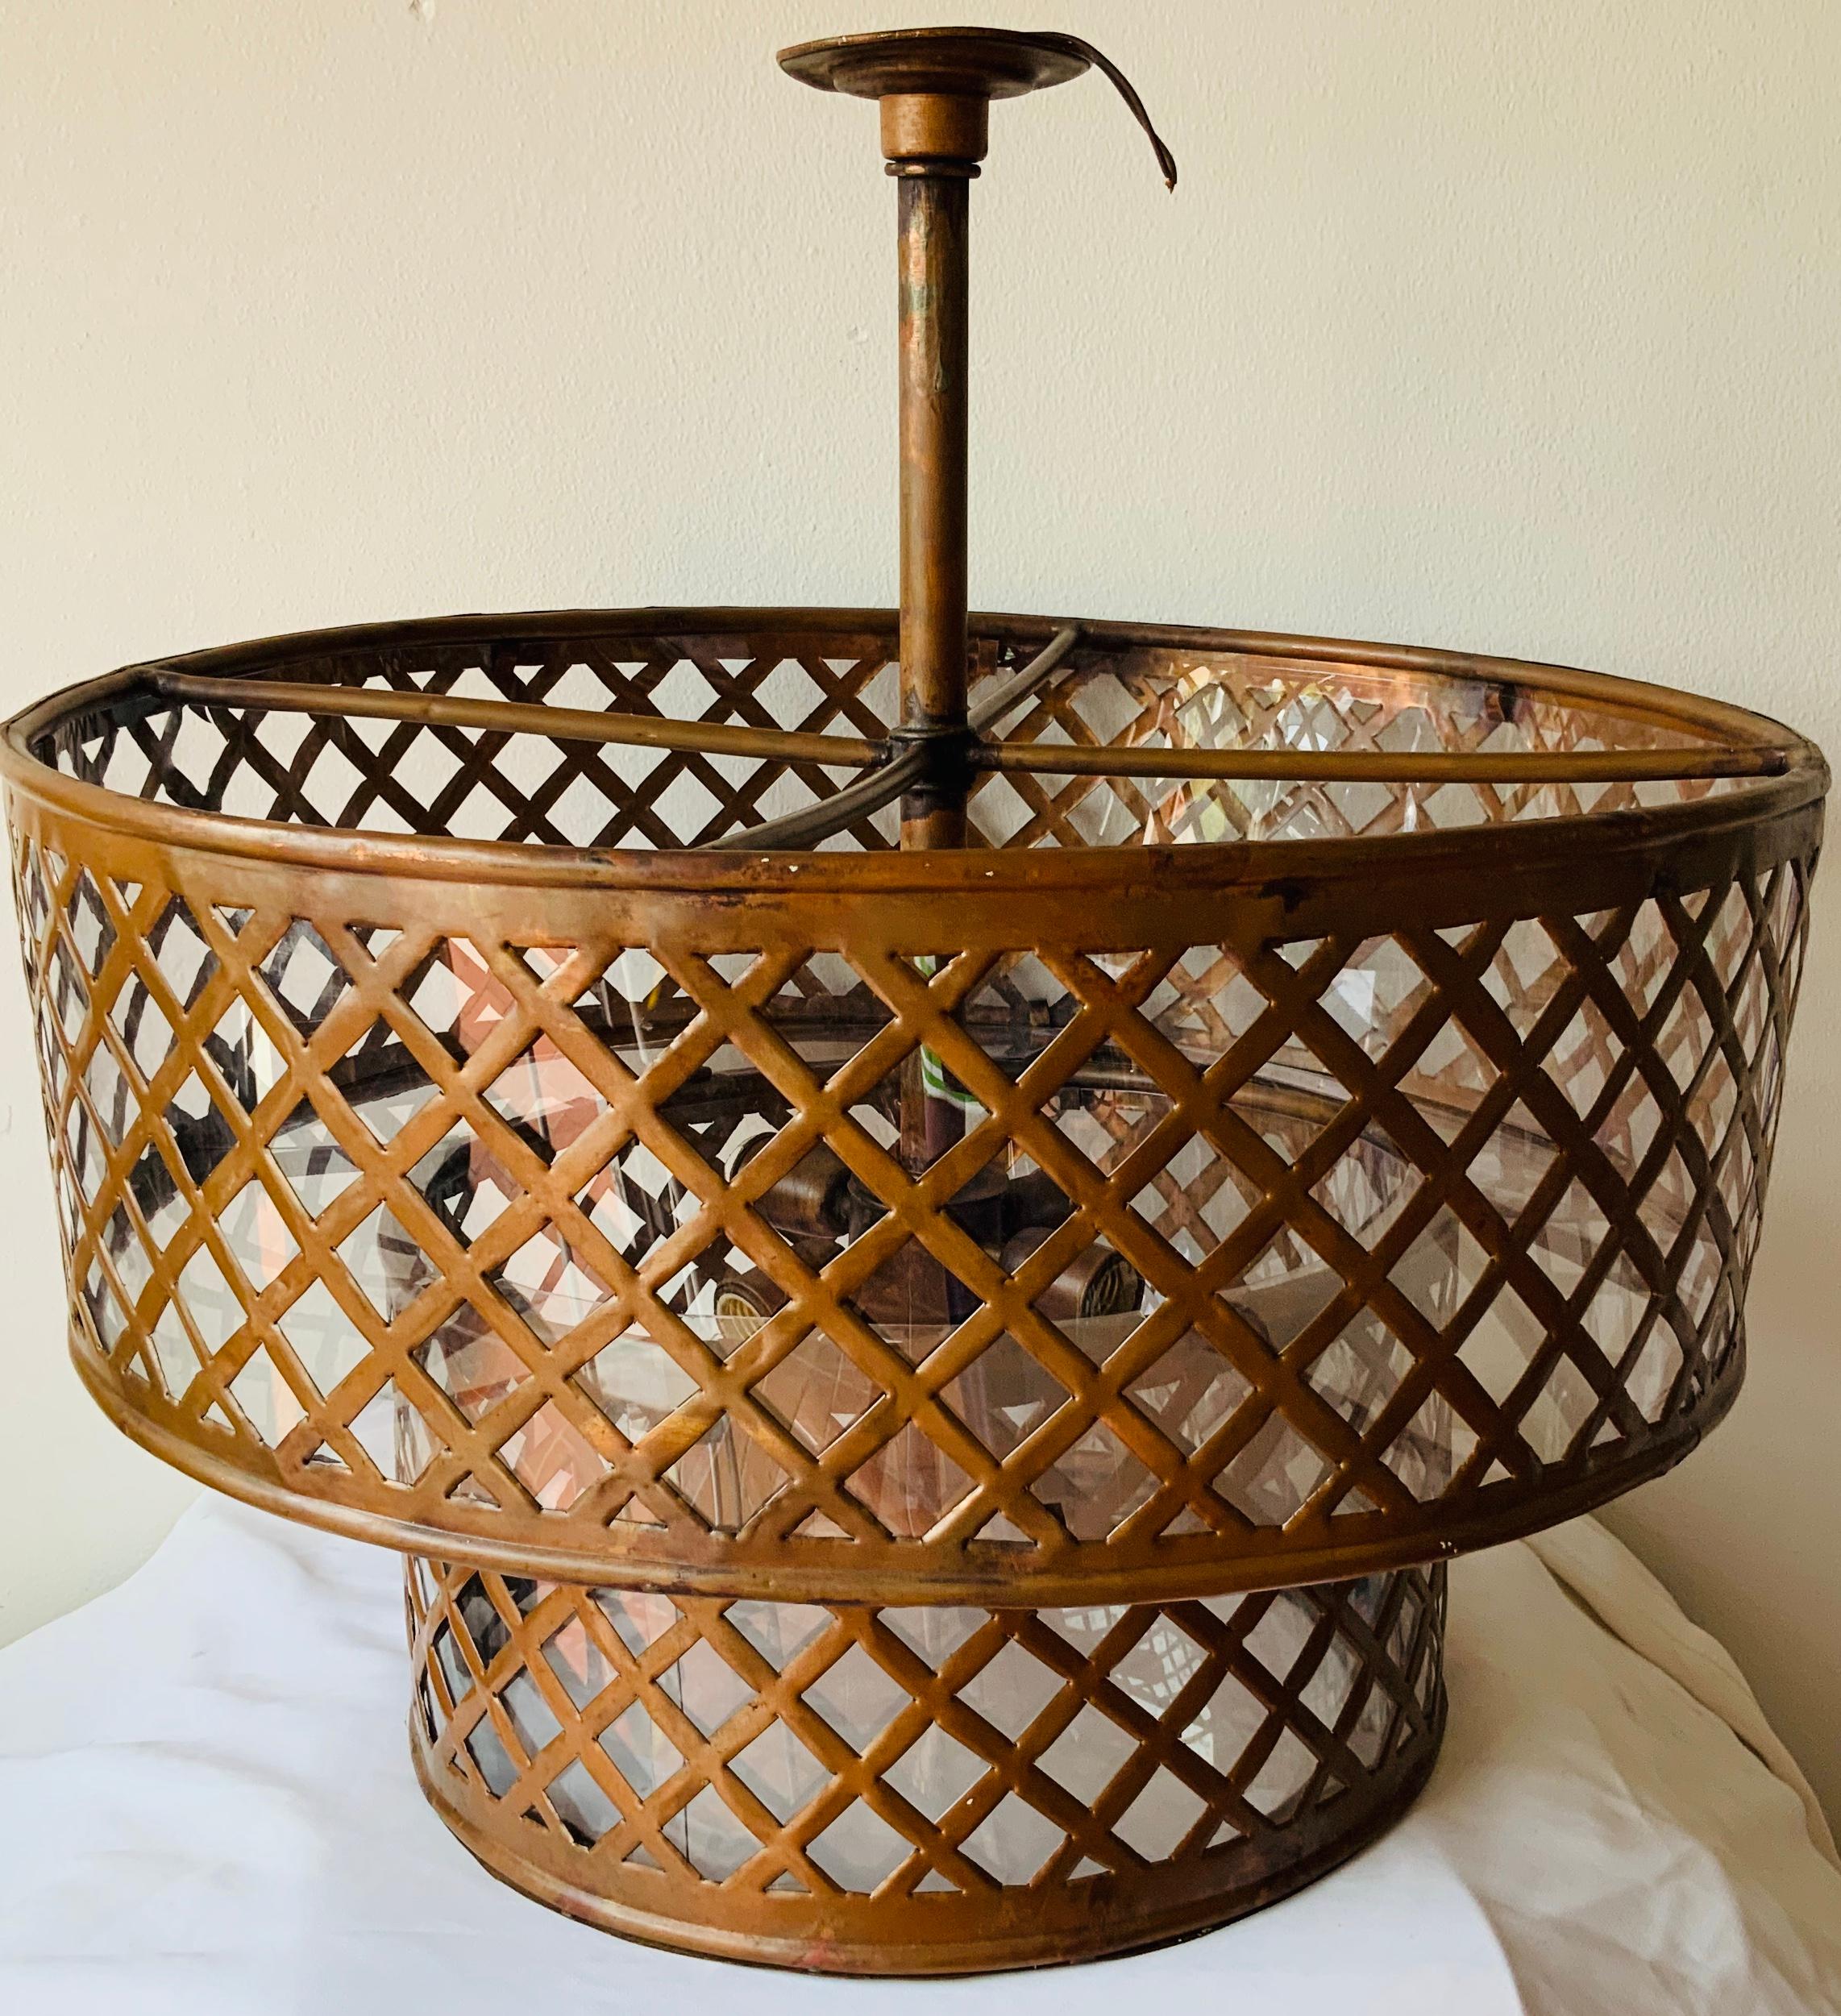 This is a double wide cylinders shaped basket copper lamp. There is one small one in the bottom and a large one in the upper part. A copper mesh adorns both cylinders. In the center, a large wide strong copper hollow stem (carry the electrical wire)